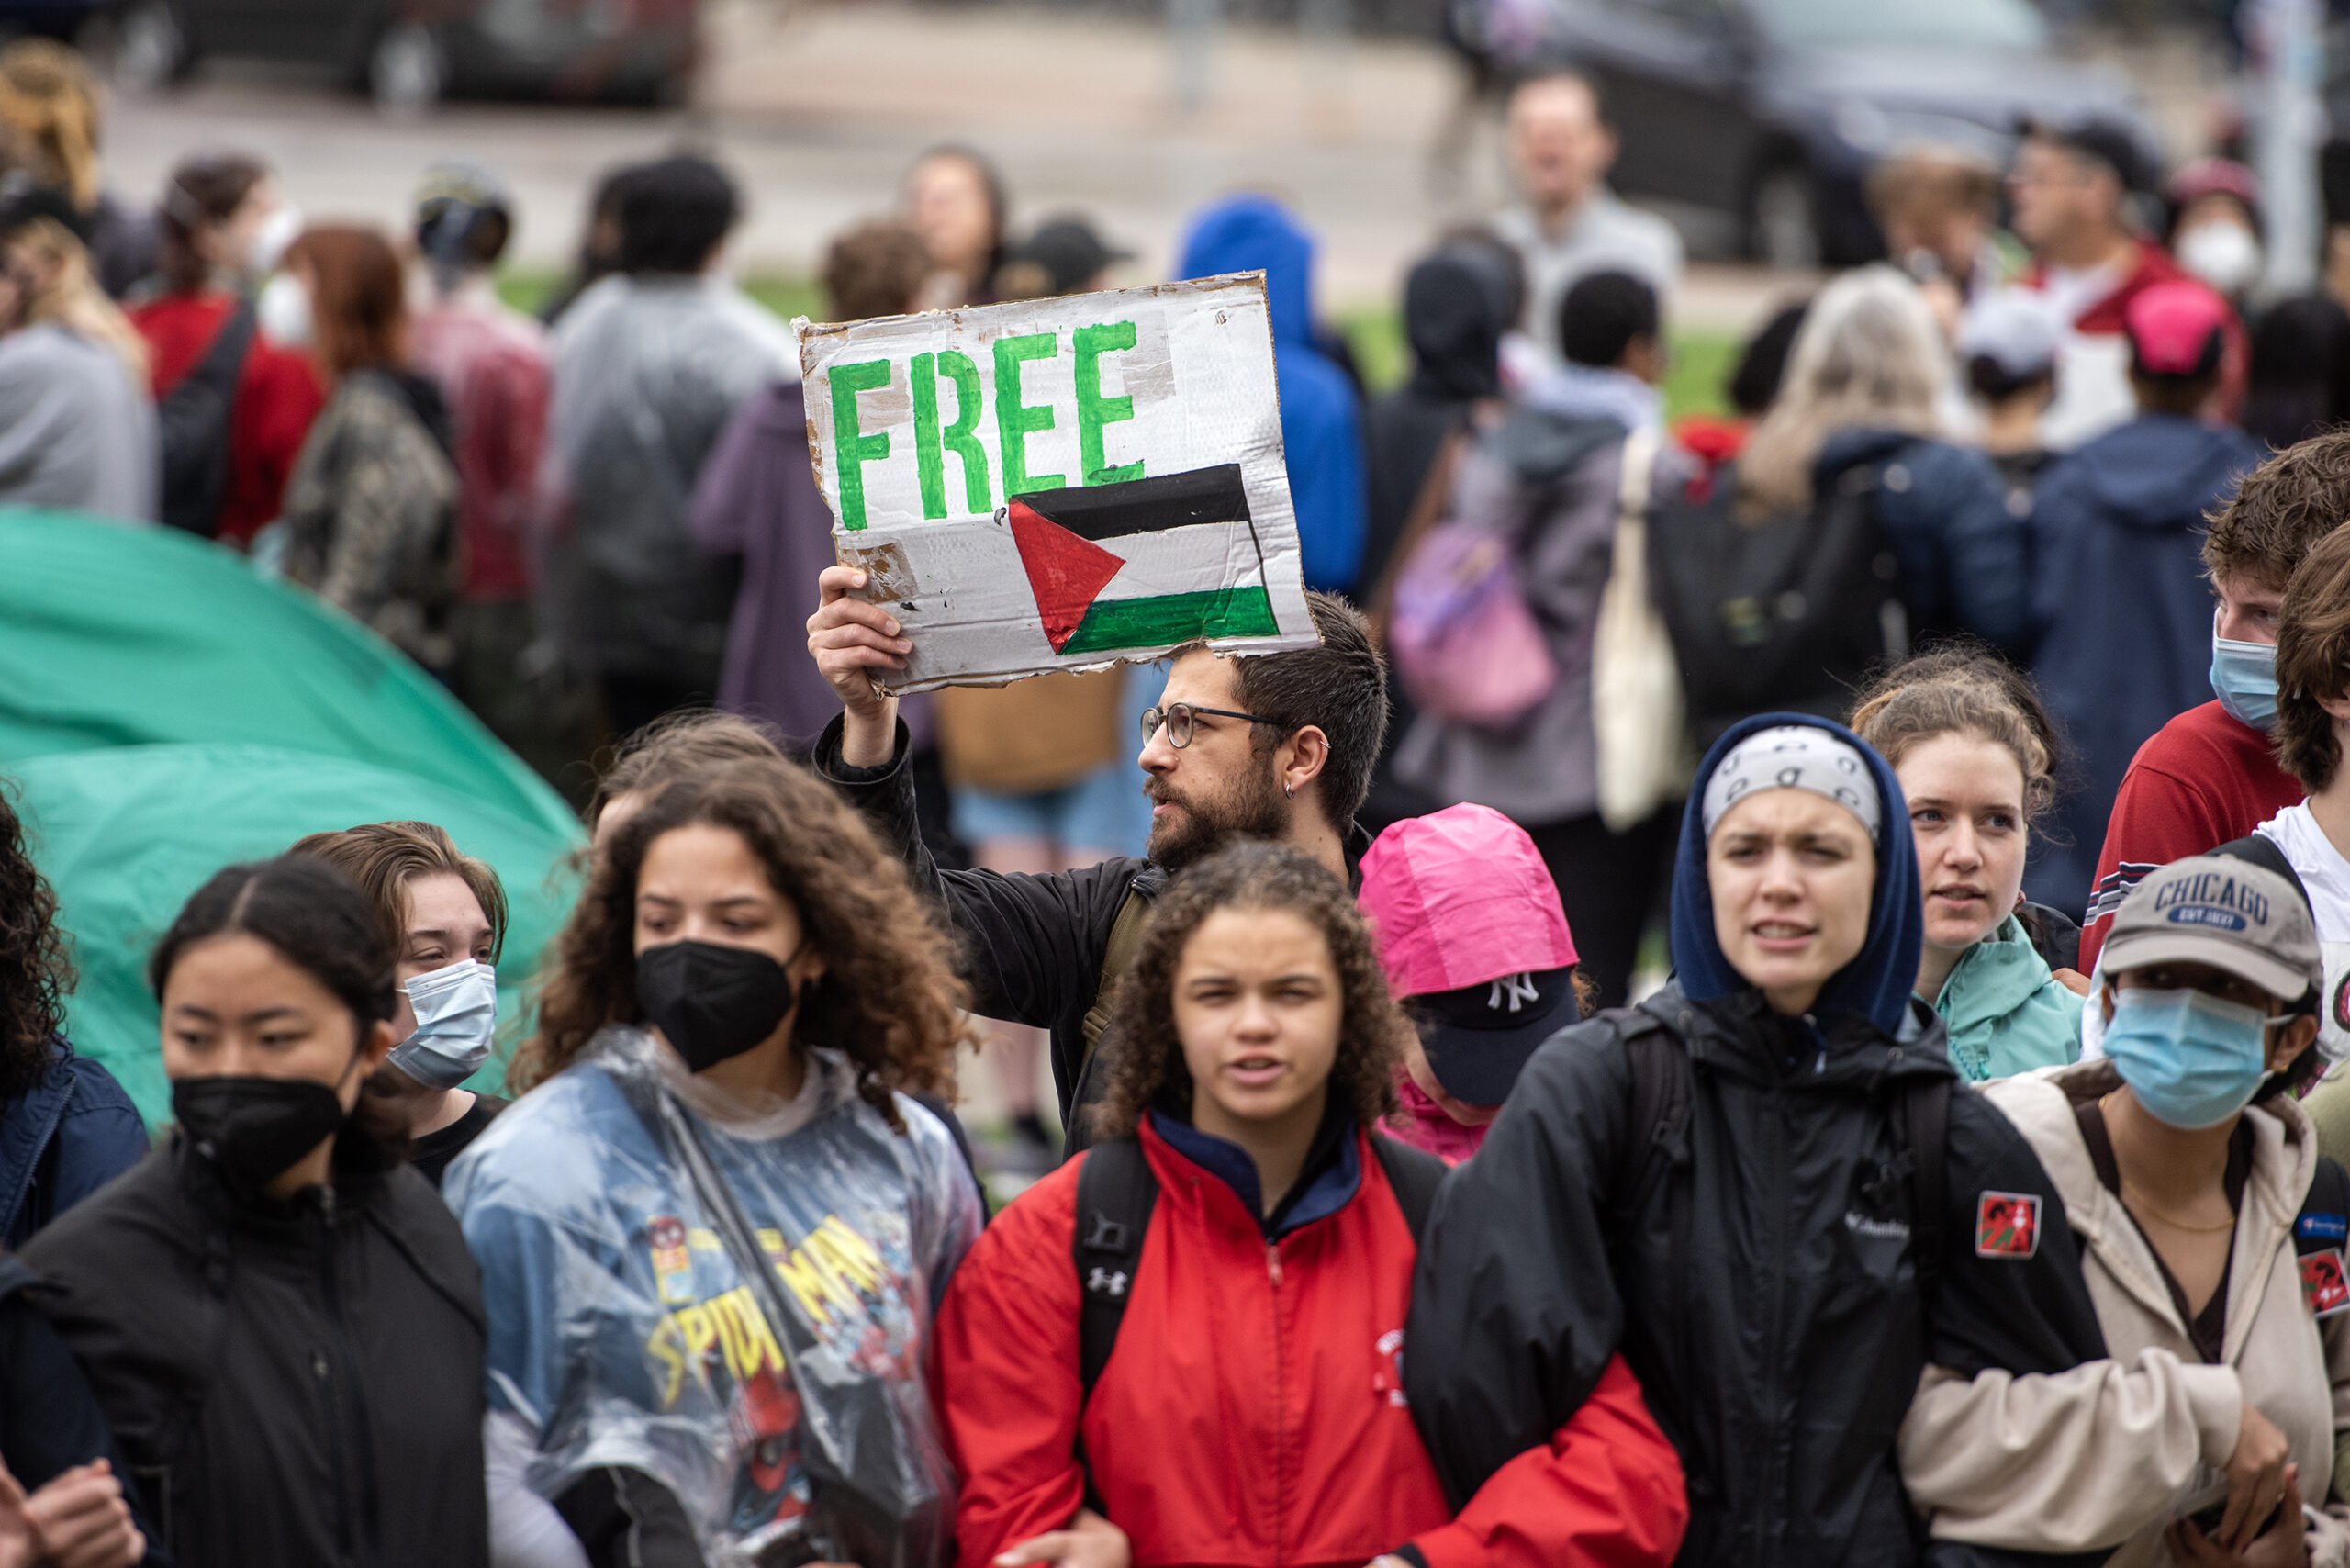 Talks stall between pro-Palestinian protesters, UW-Madison leaders